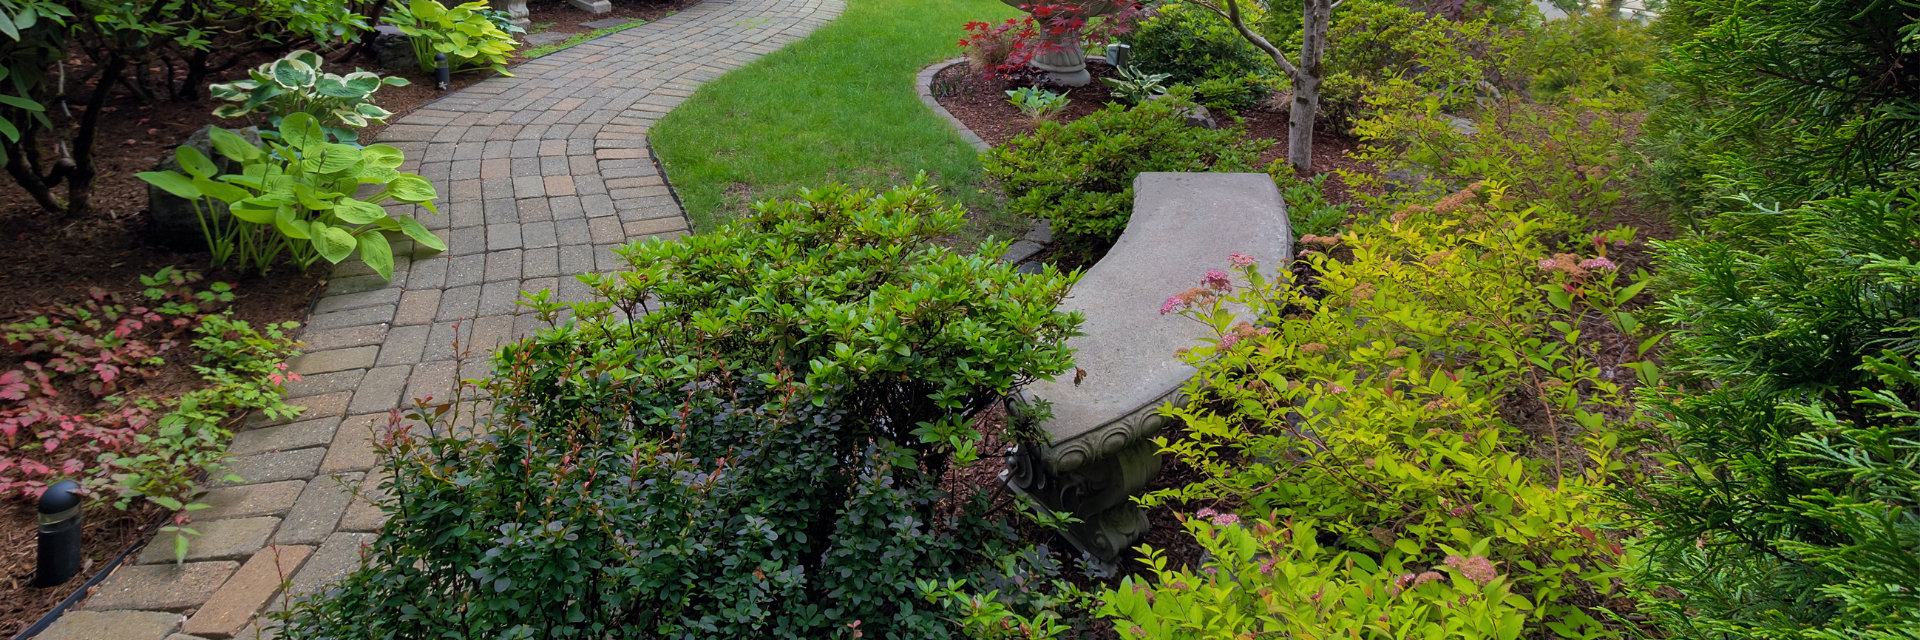 Front Yard Landscaping Ideas for Fall   Tyrone, GA